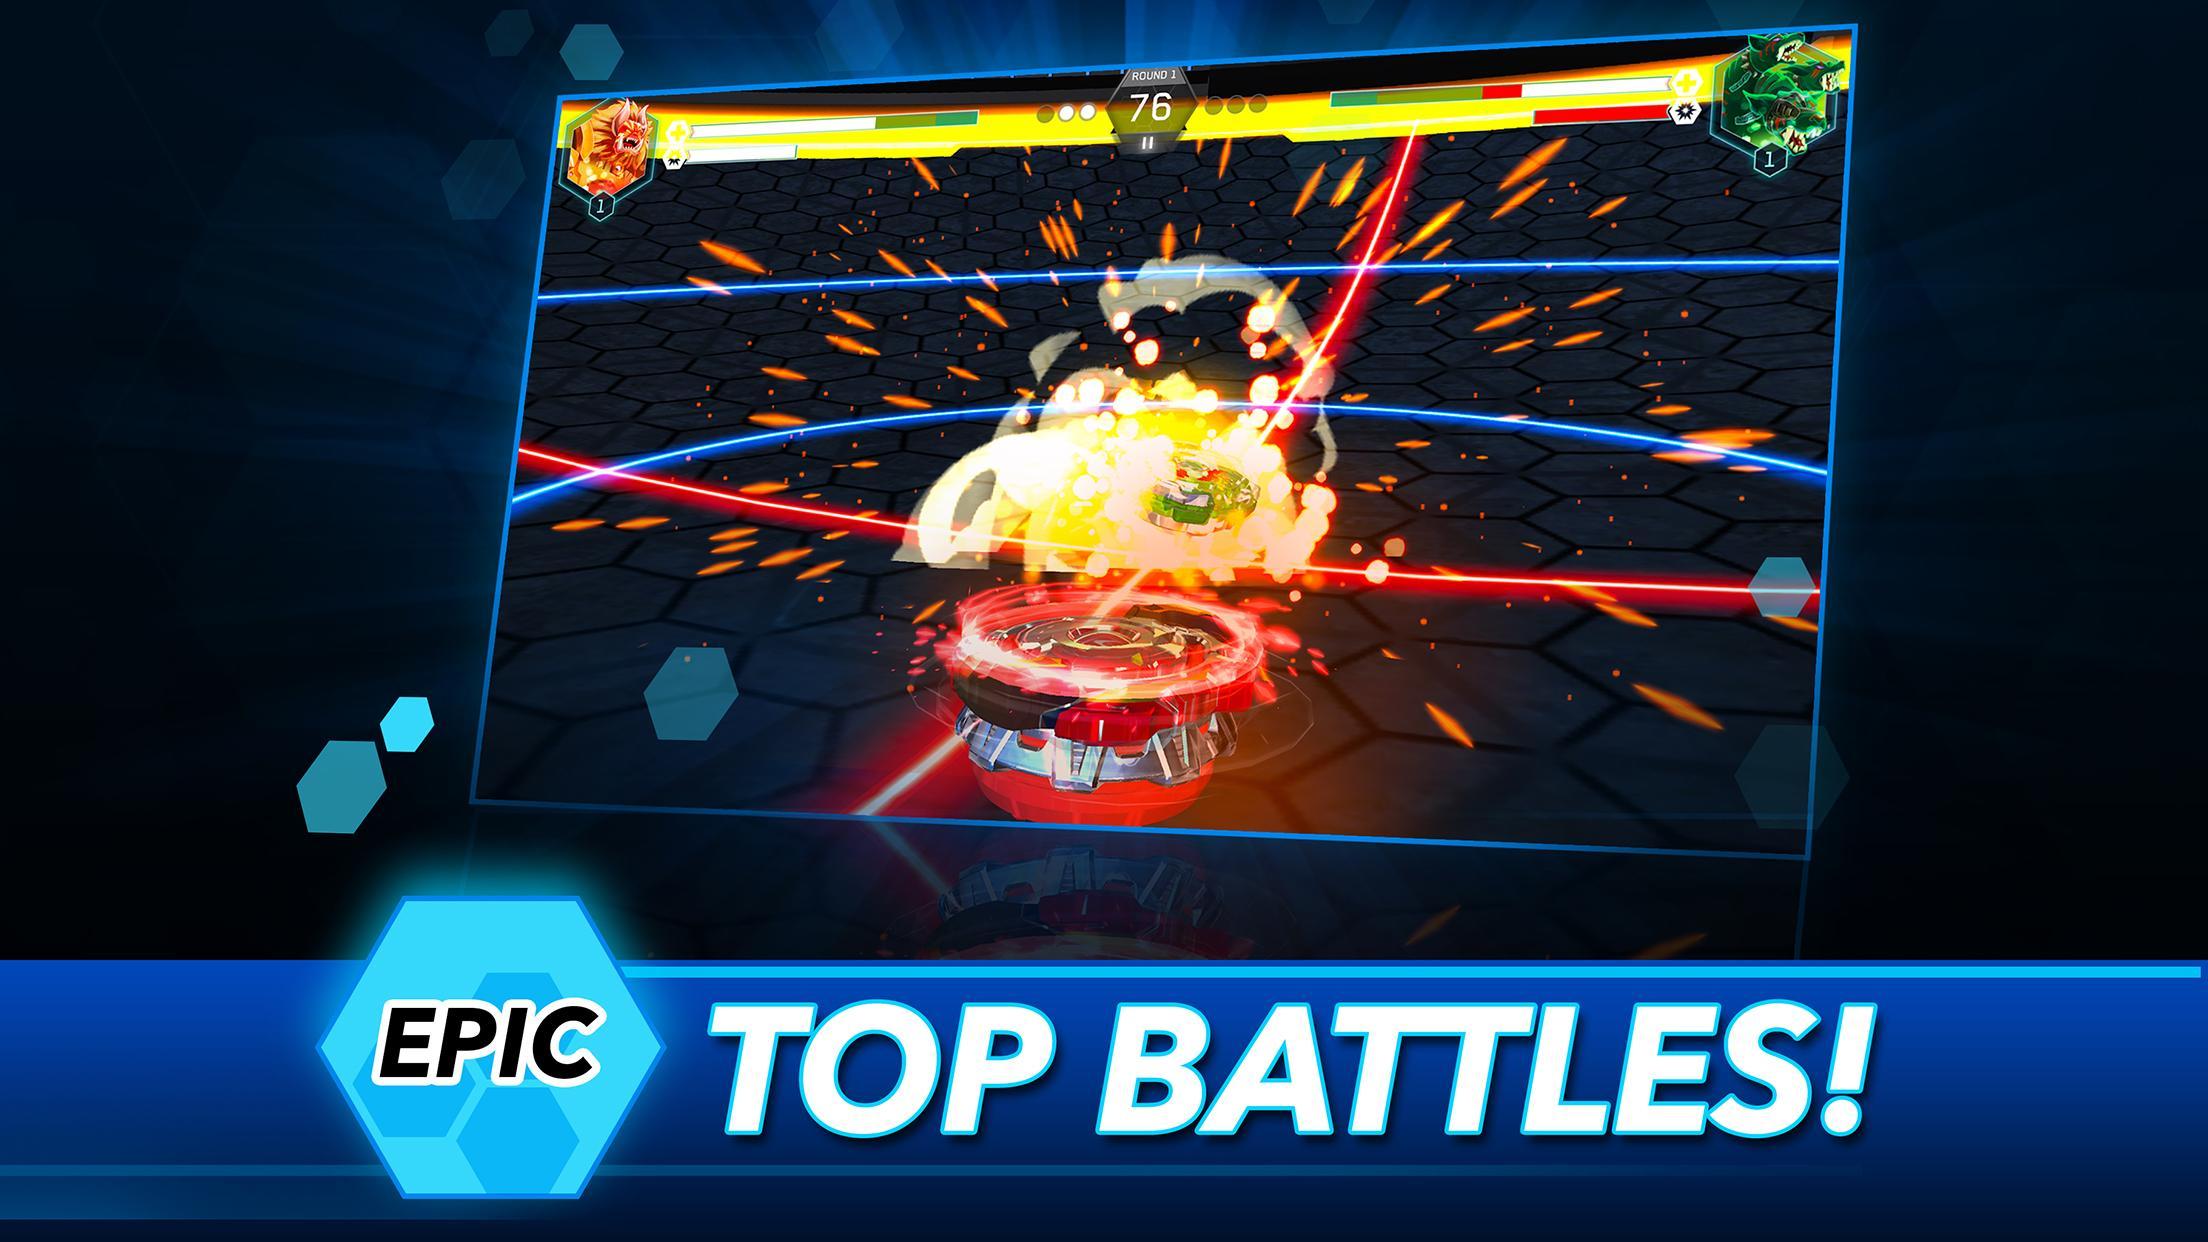 beyblade download game